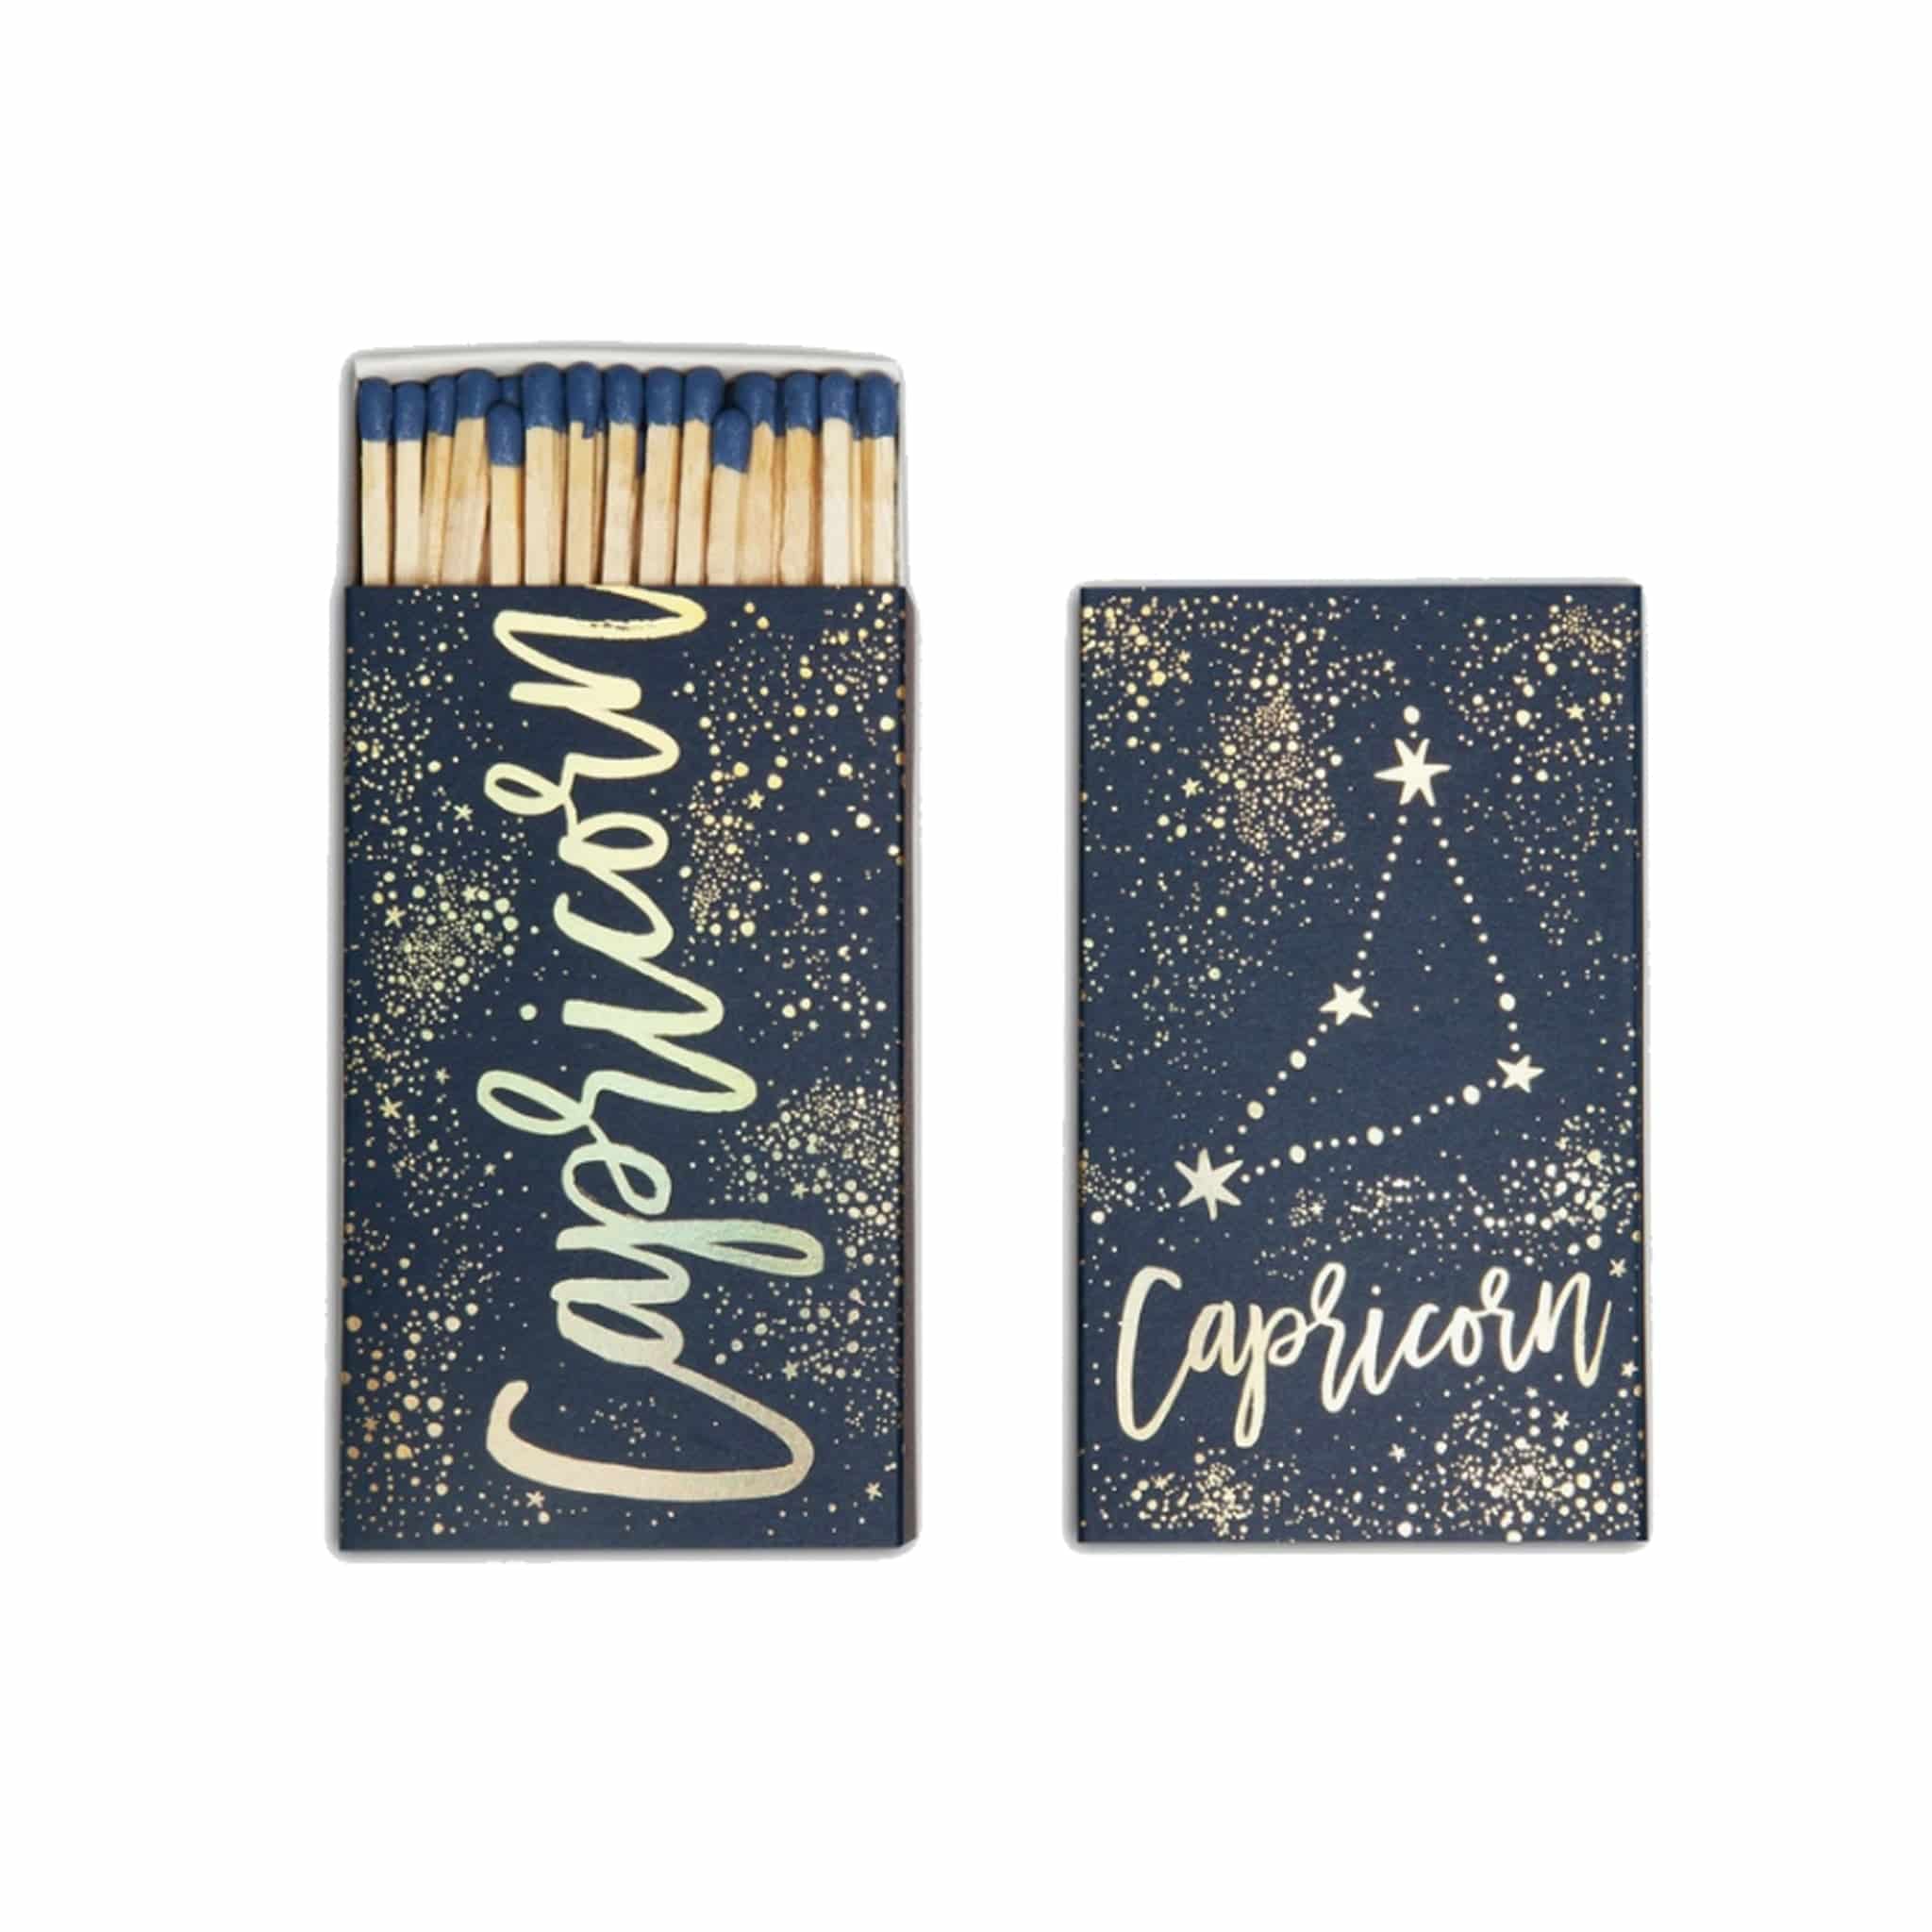 Capricorn Zodiac Matchbook - Extgra Large 4.5" Cigar Matches - The Gilded Witch